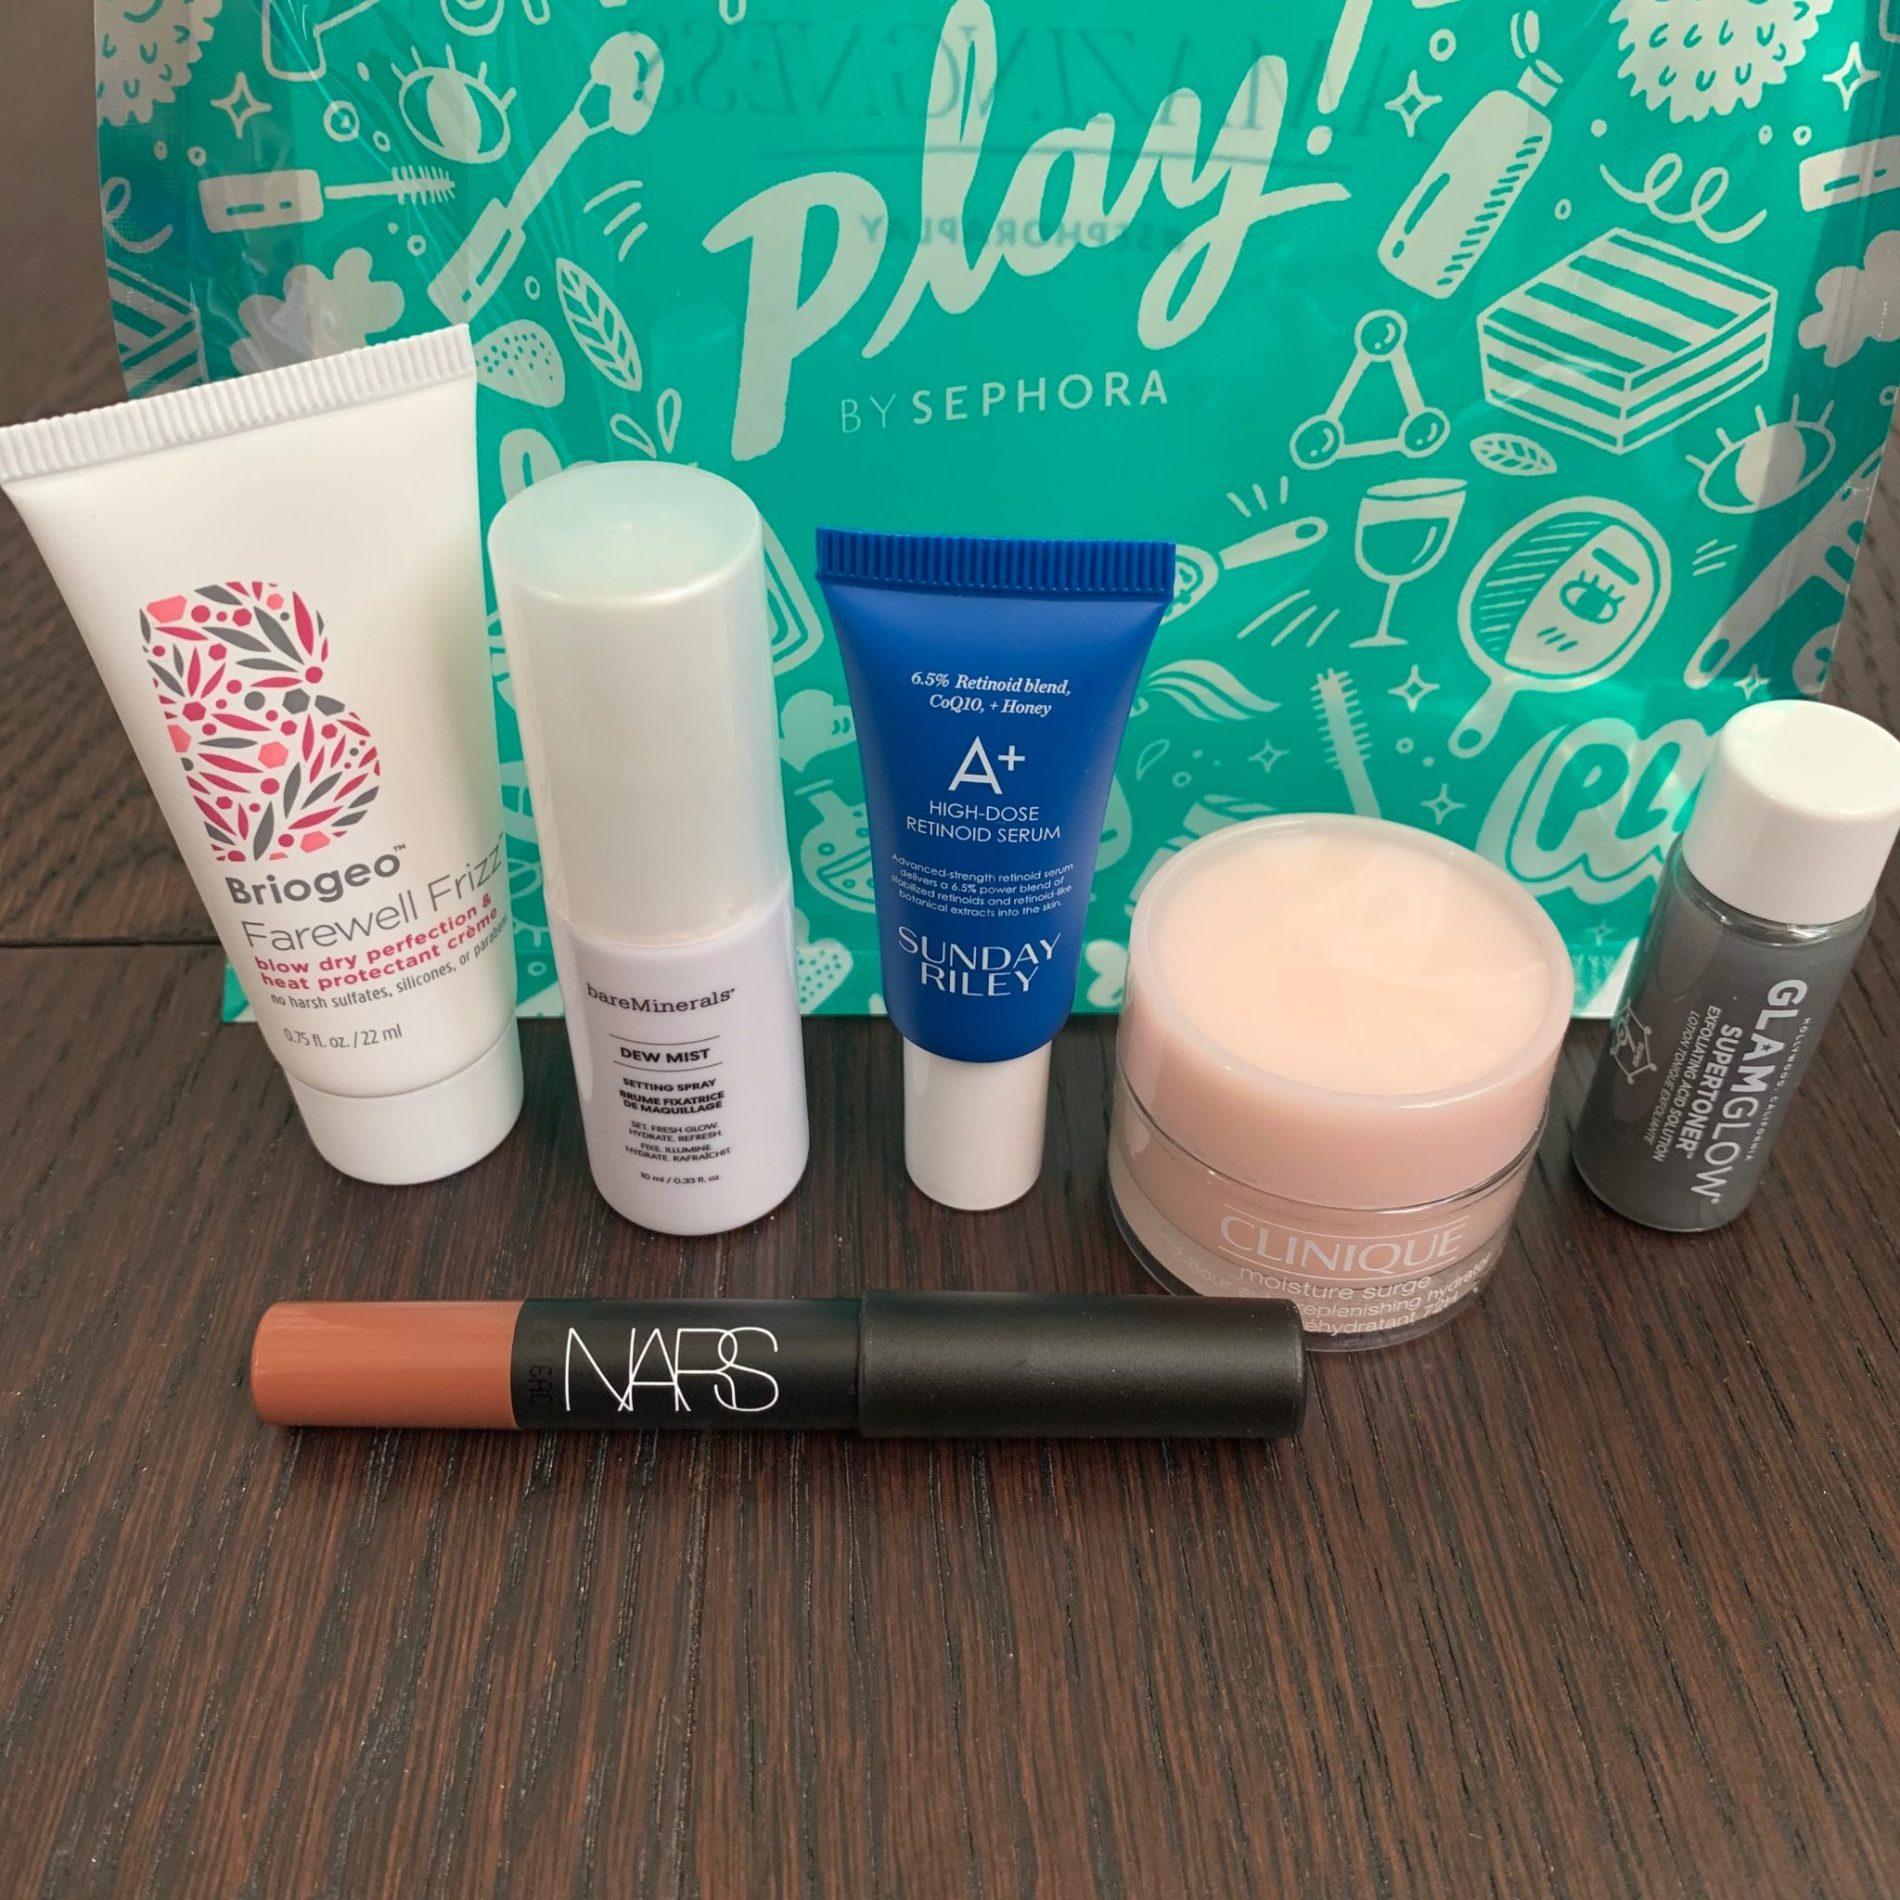 Play! by Sephora Review – August 2019